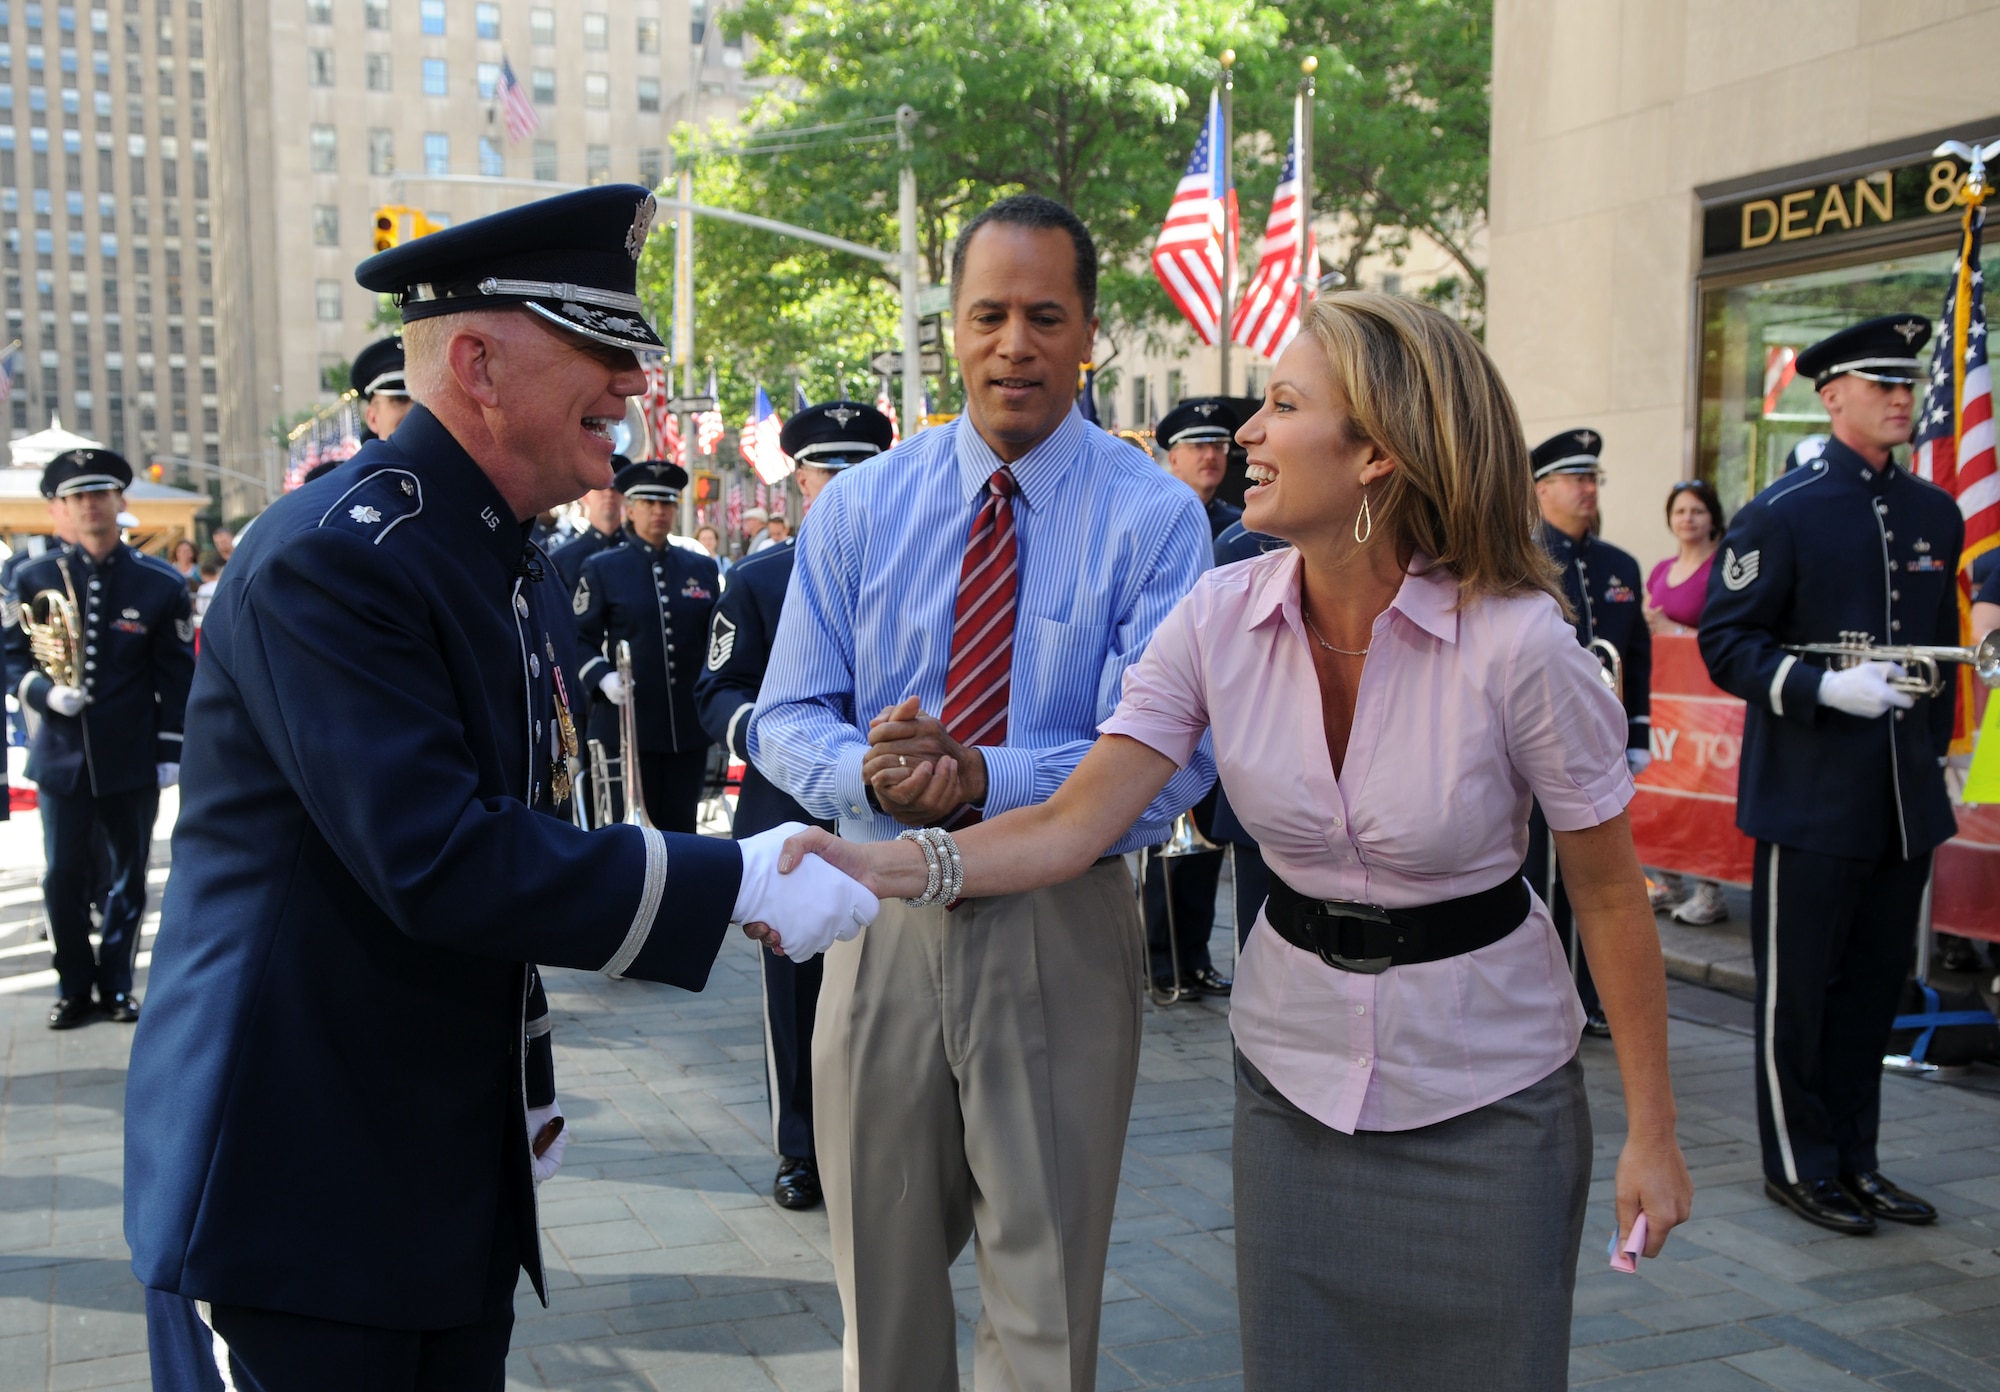 Lt. Col. Alan Sierichs, United States Air Force Band commander, meets with "Today" show hosts Lester Holt and Amy Robach during a live Independence Day broadcast from Rockefeller Plaza in New York City. The Ceremonial Brass has performed annually on the Today show since 1998. (U.S. Air Force photo by Senior Airman Marleah Miller)